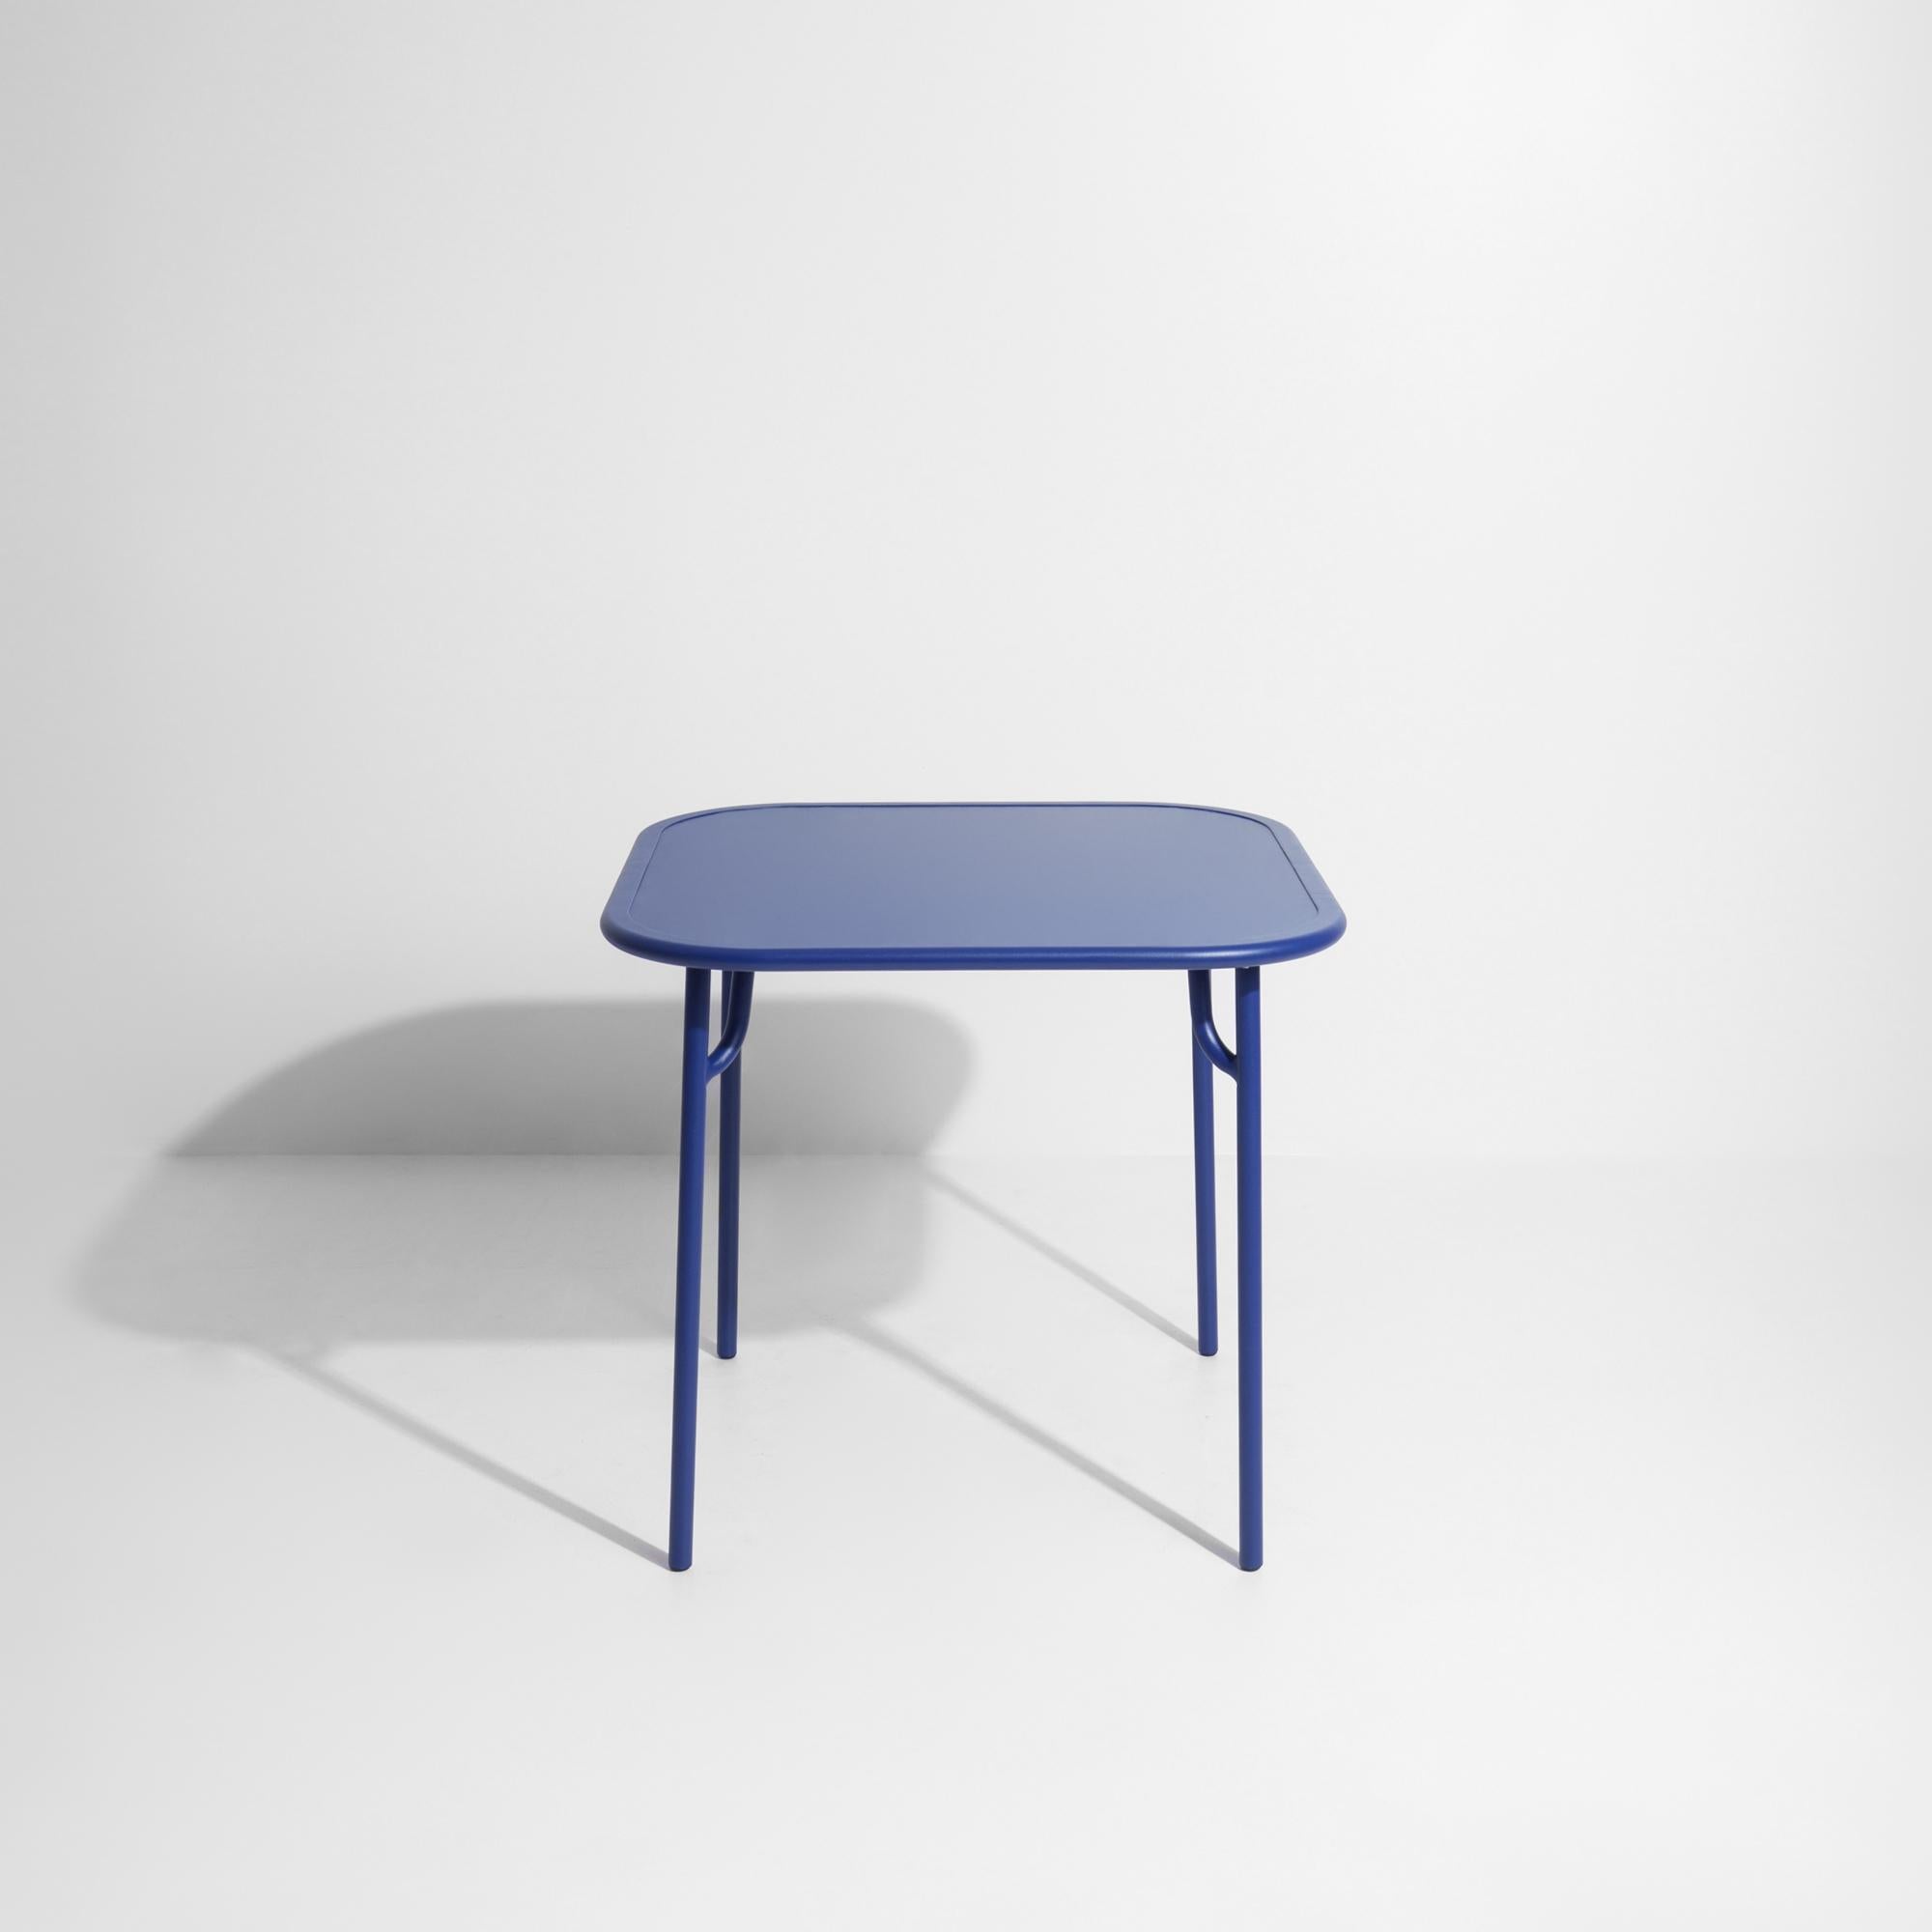 Petite Friture Week-End Plain Square Dining Table in Blue Aluminium by Studio BrichetZiegler, 2017

The week-end collection is a full range of outdoor furniture, in aluminium grained epoxy paint, matt finish, that includes 18 functions and 8